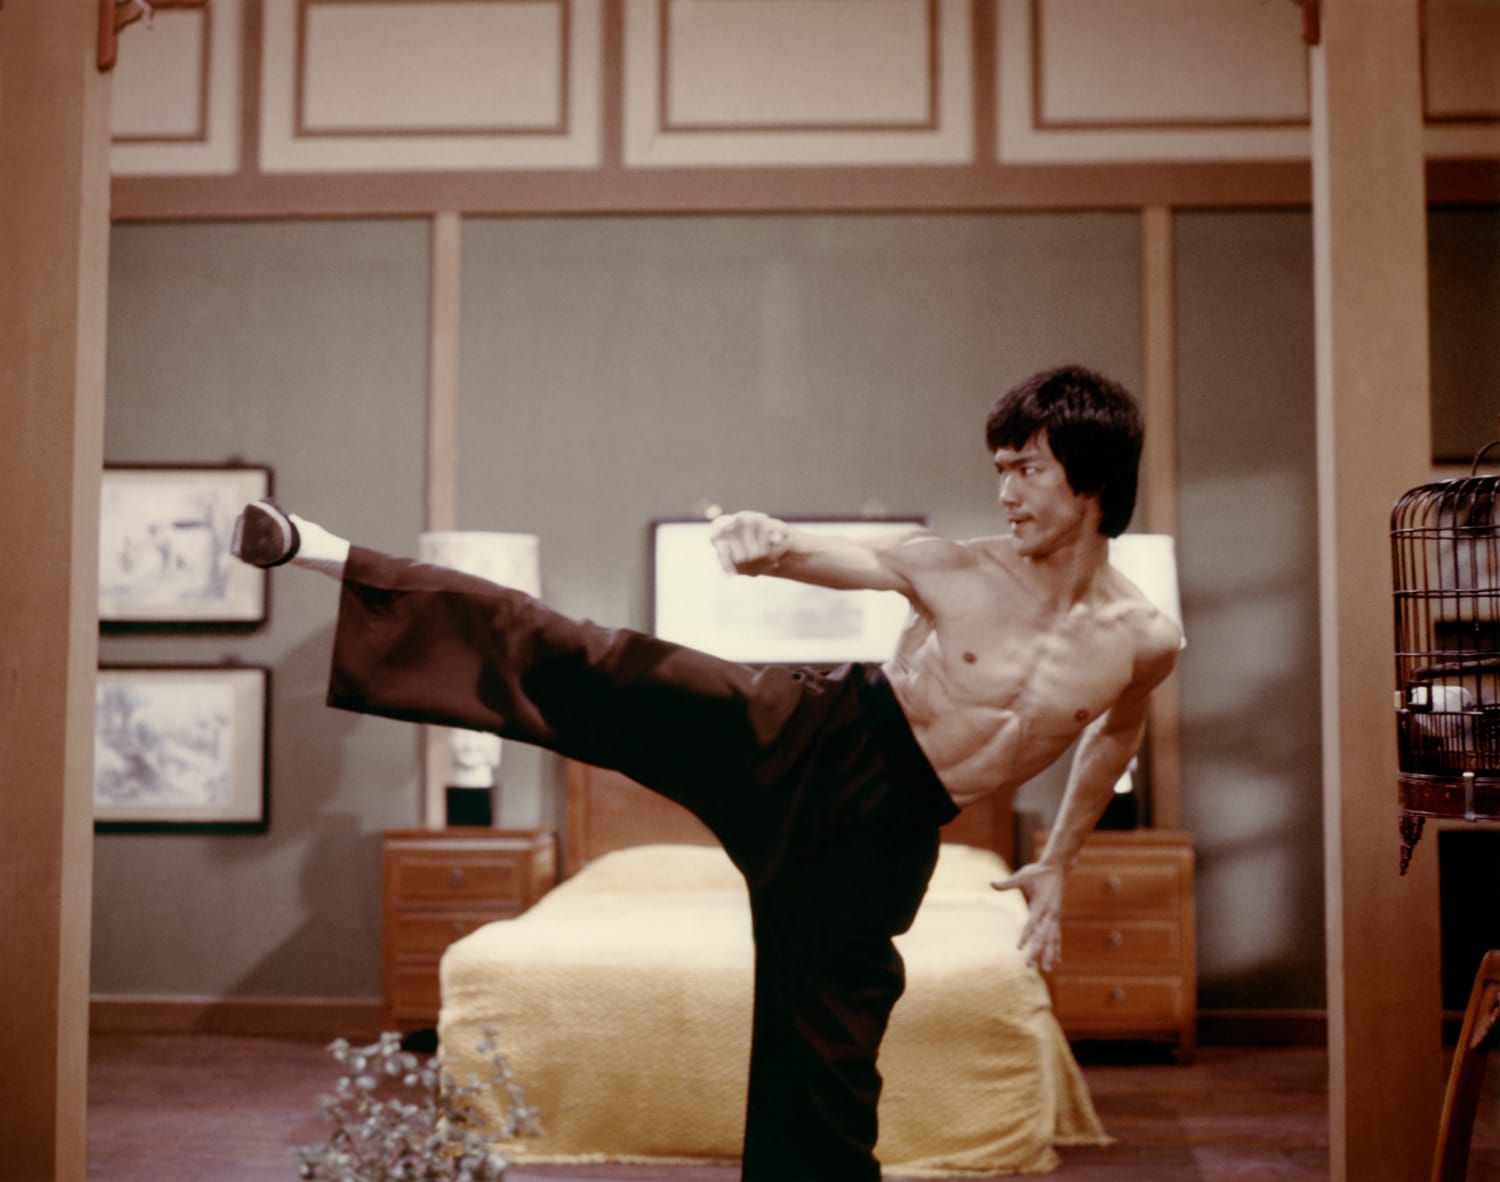 Bruce Lee's studio in .'s Chinatown has reopened after 50 years